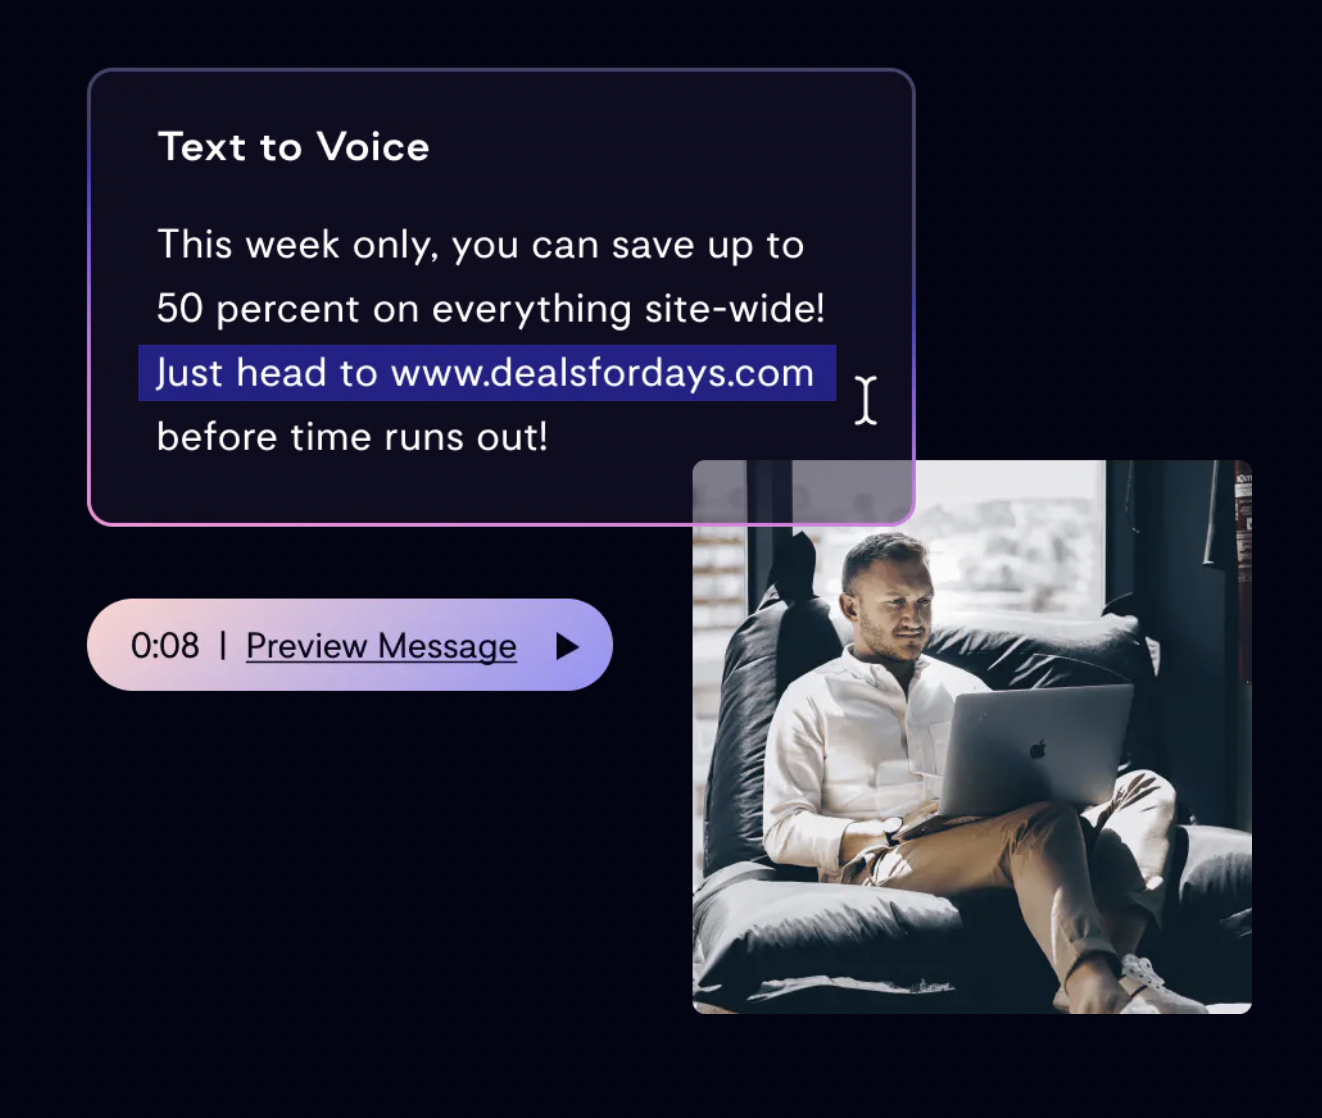 Whispir’s Interactive Voice Response (IVR) workflows give you the ability to create voice messages by converting text into spoken word. This makes it easy to draft and review outreach on the spot while speeding up the overall delivery of important communications.